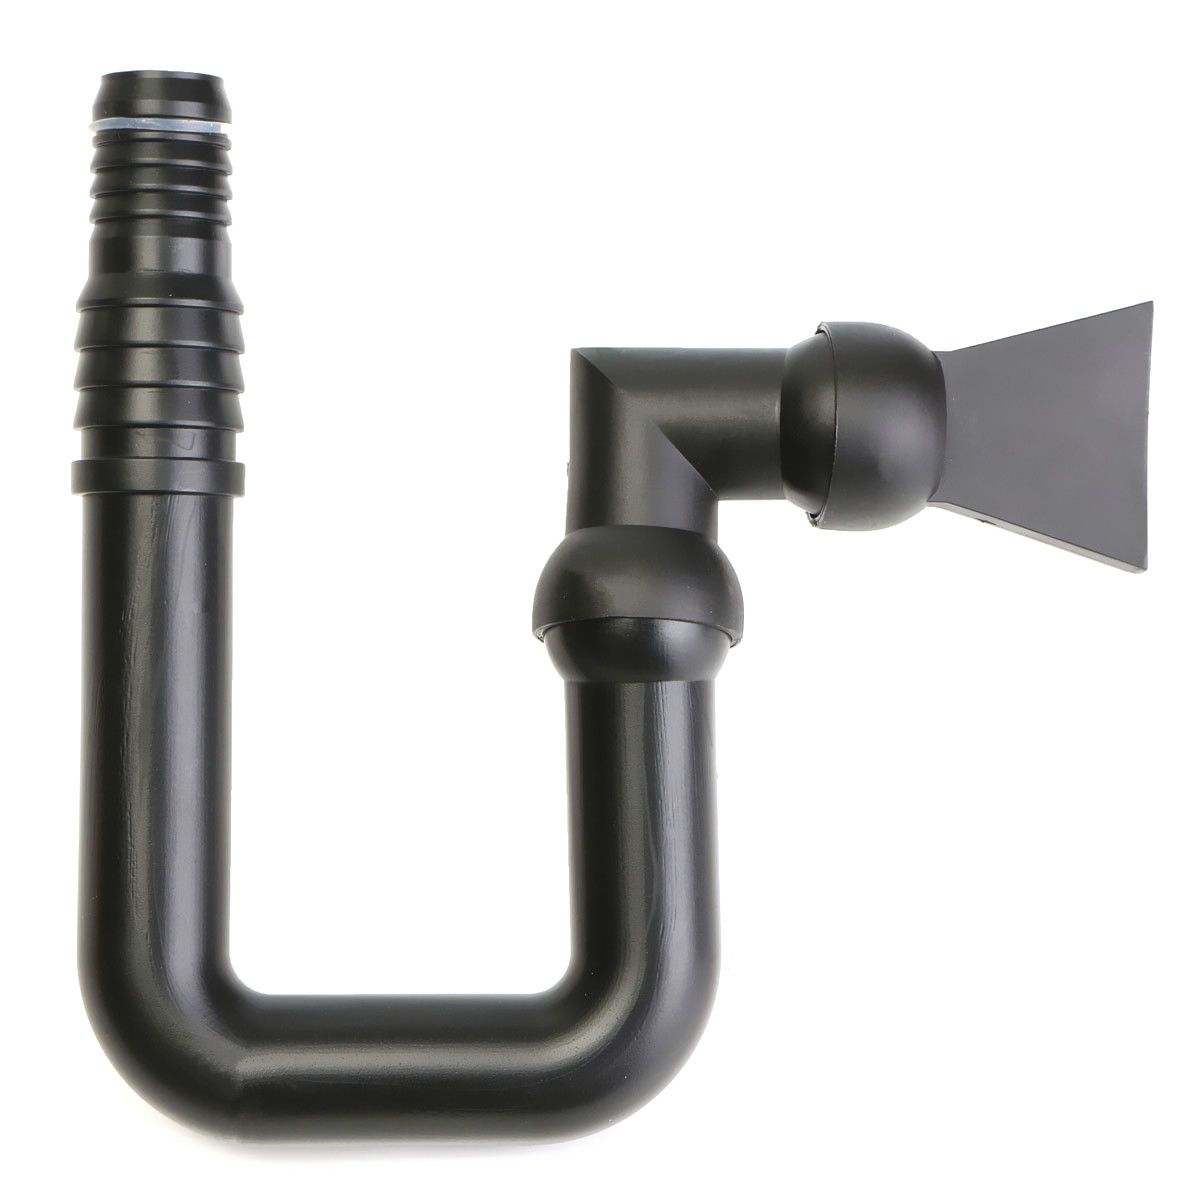 Black-Aquarium-Multi-Angle-Outflow-Water-Pipe-with-Duck-Bill-Hose-For-Sump-Tank-Fish-1311106